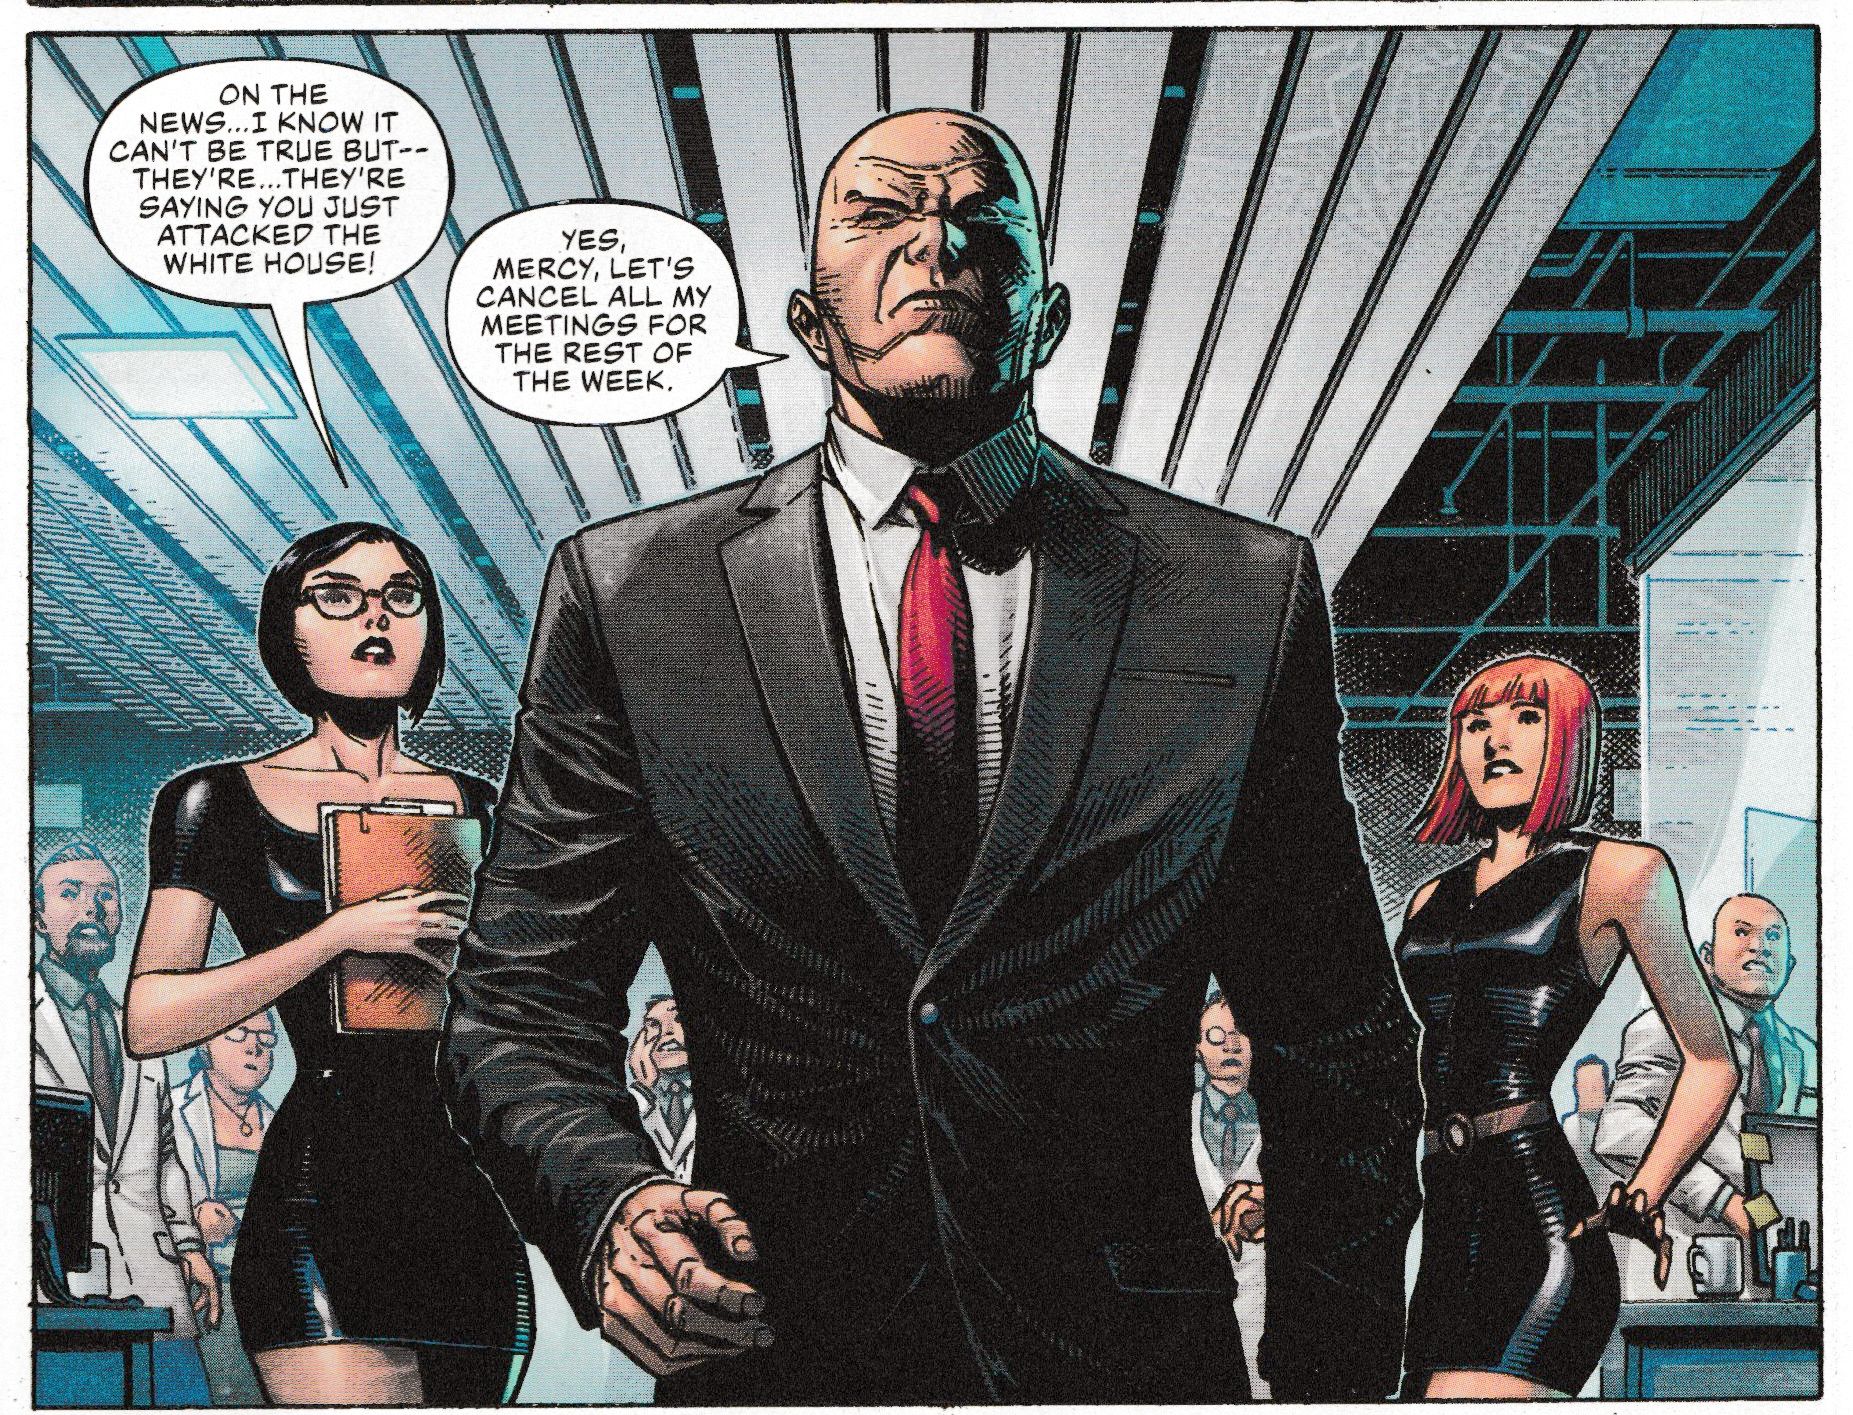 Now Lex Luthor Attacks Donald Trump in DC's Year Of The Villain #1 ...